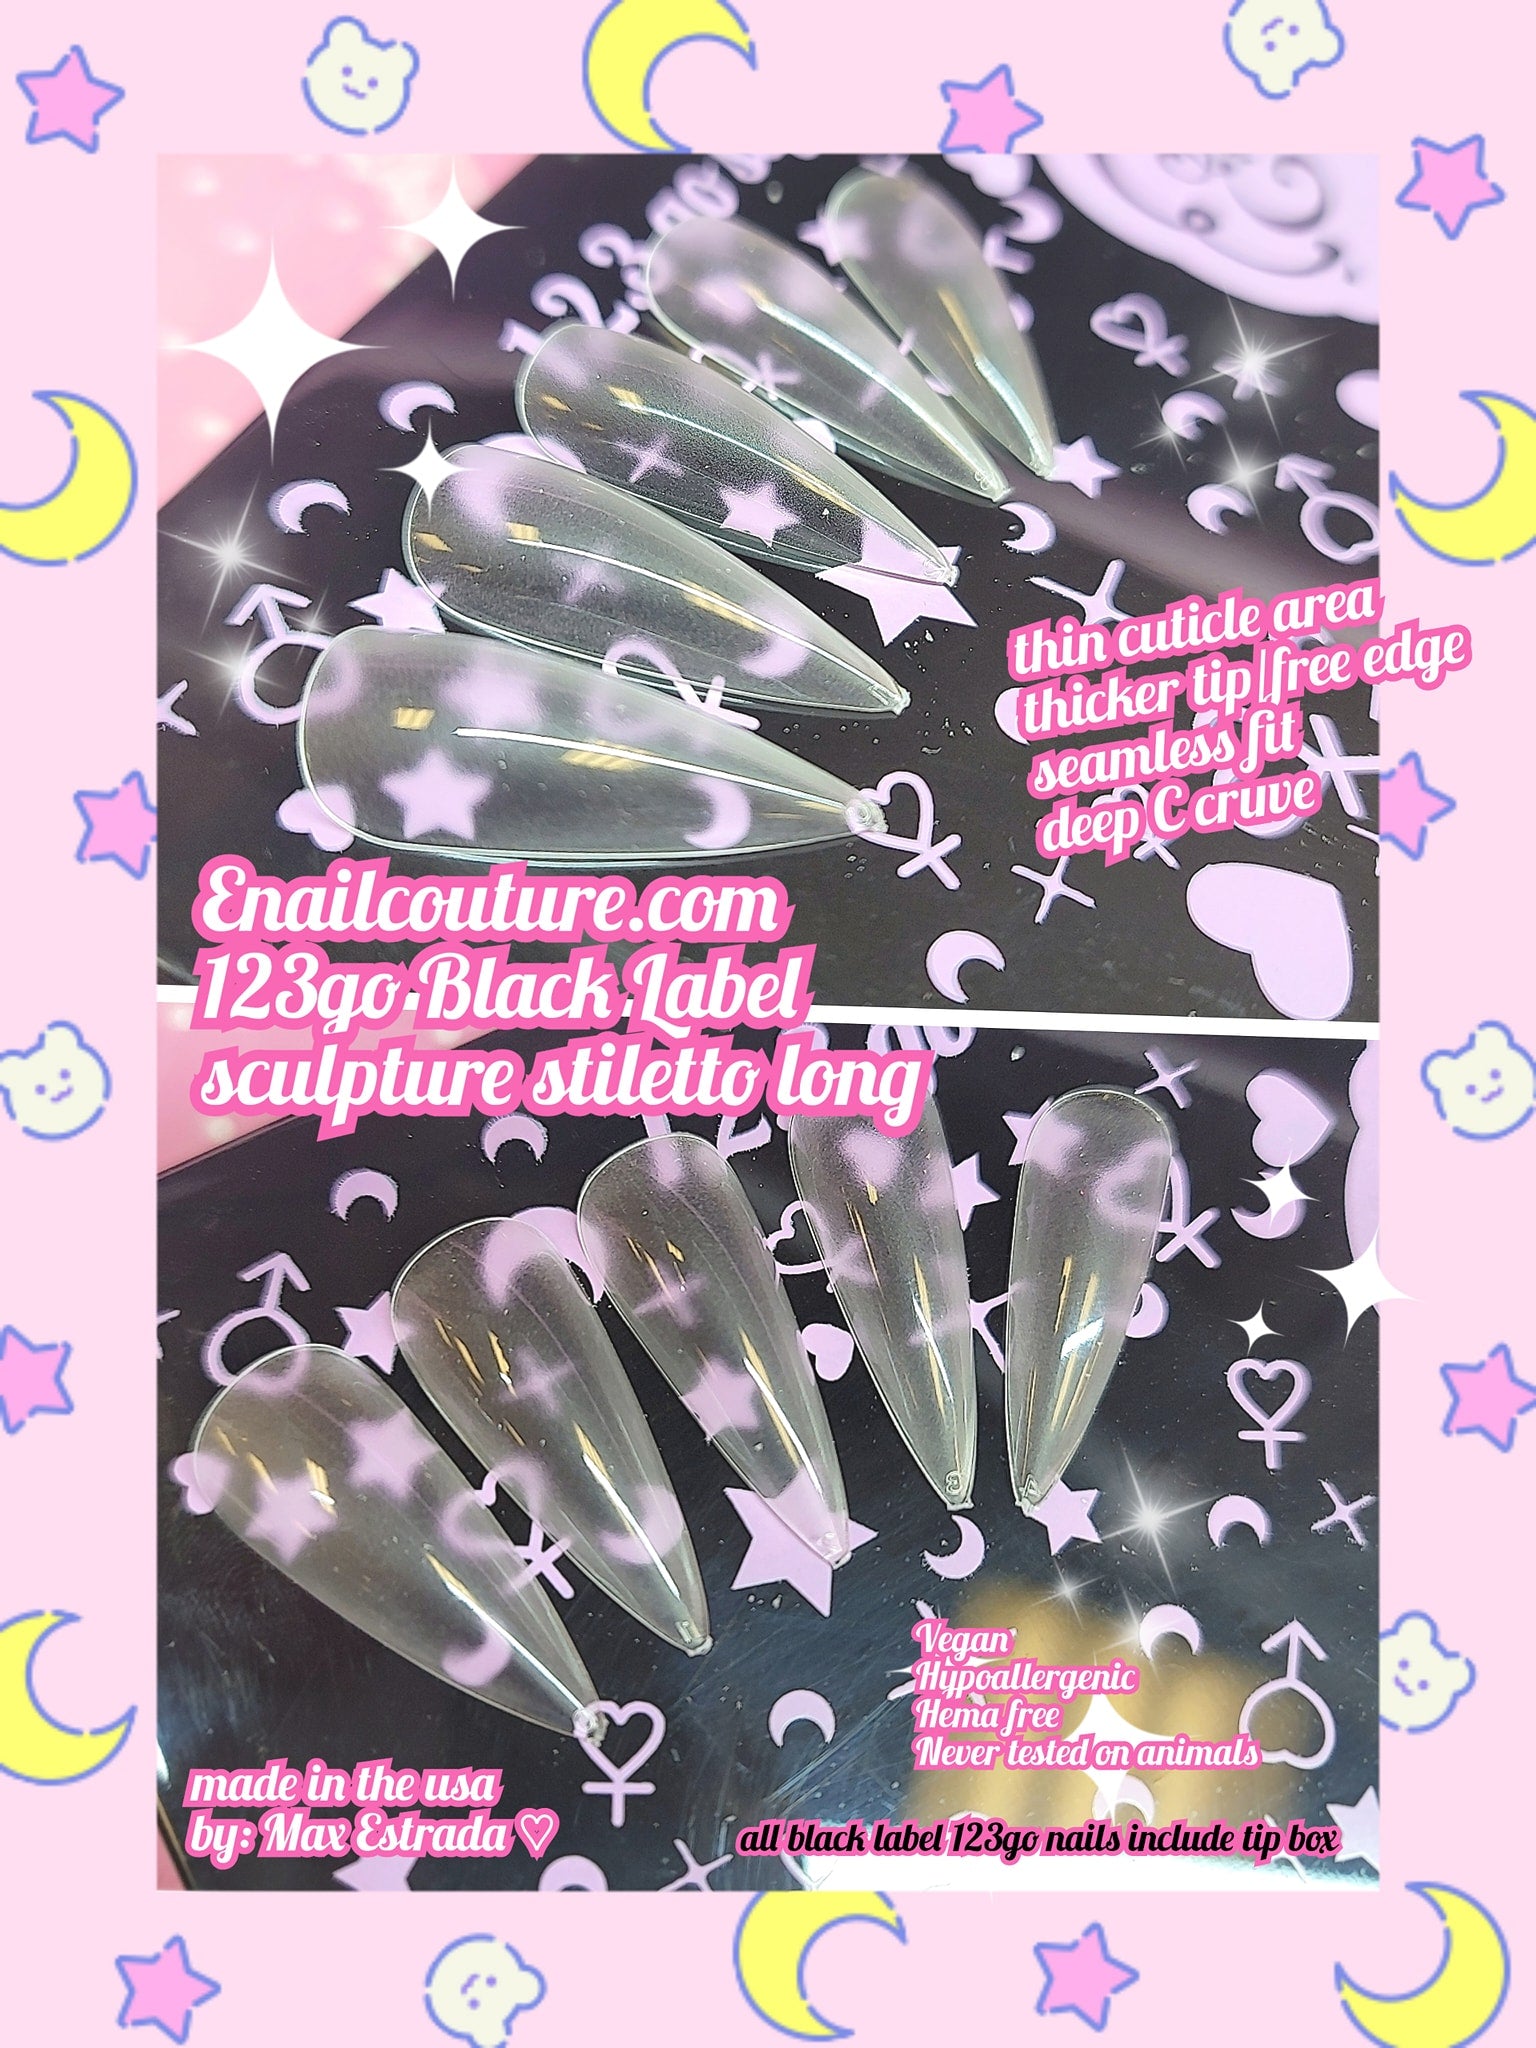 123go Black Label Nails Sculpture Stiletto L (Soft Gel Nail Tips- Clear Cover Full Nail Extensions - Pre-shaped Acrylic False Gelly Nail Tips 12 Sizes for DIY Salon Nail Extensions)